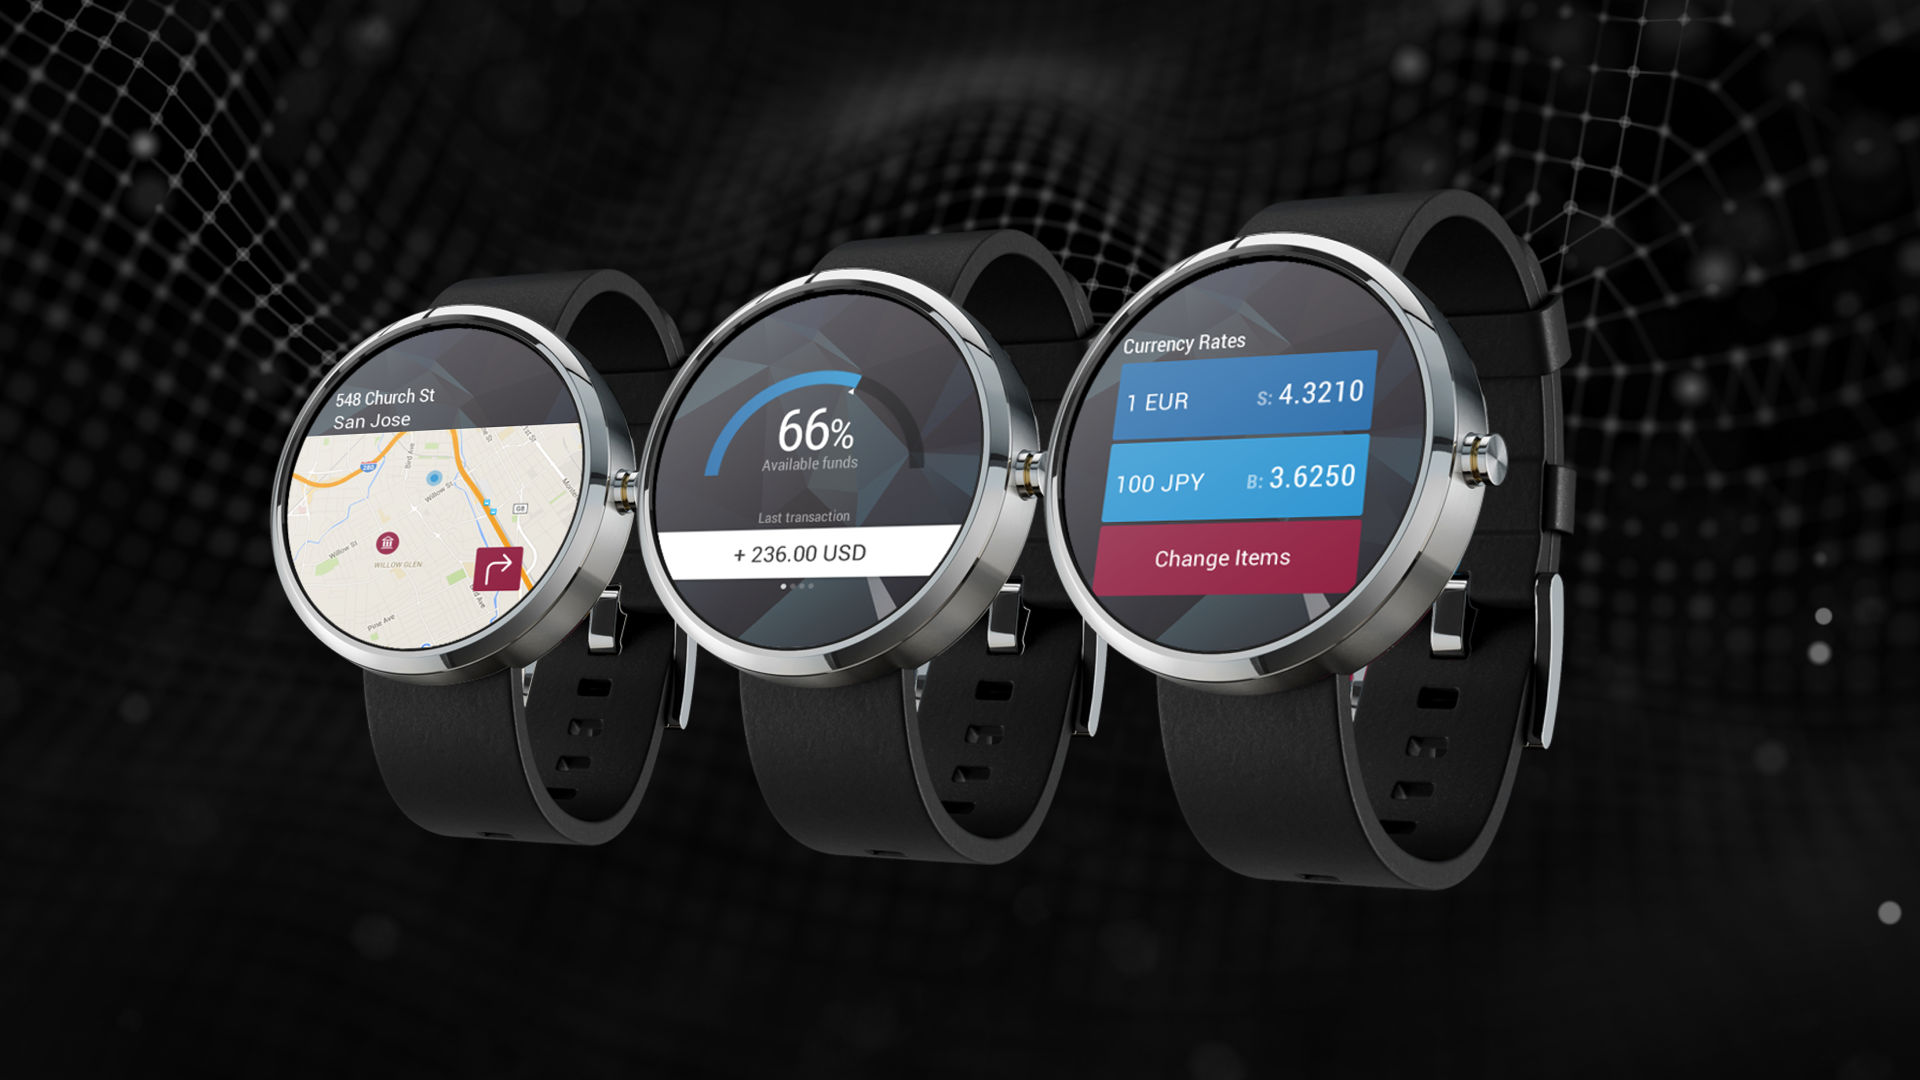 Smartwatch banking - why should banks go for it? | Finanteq